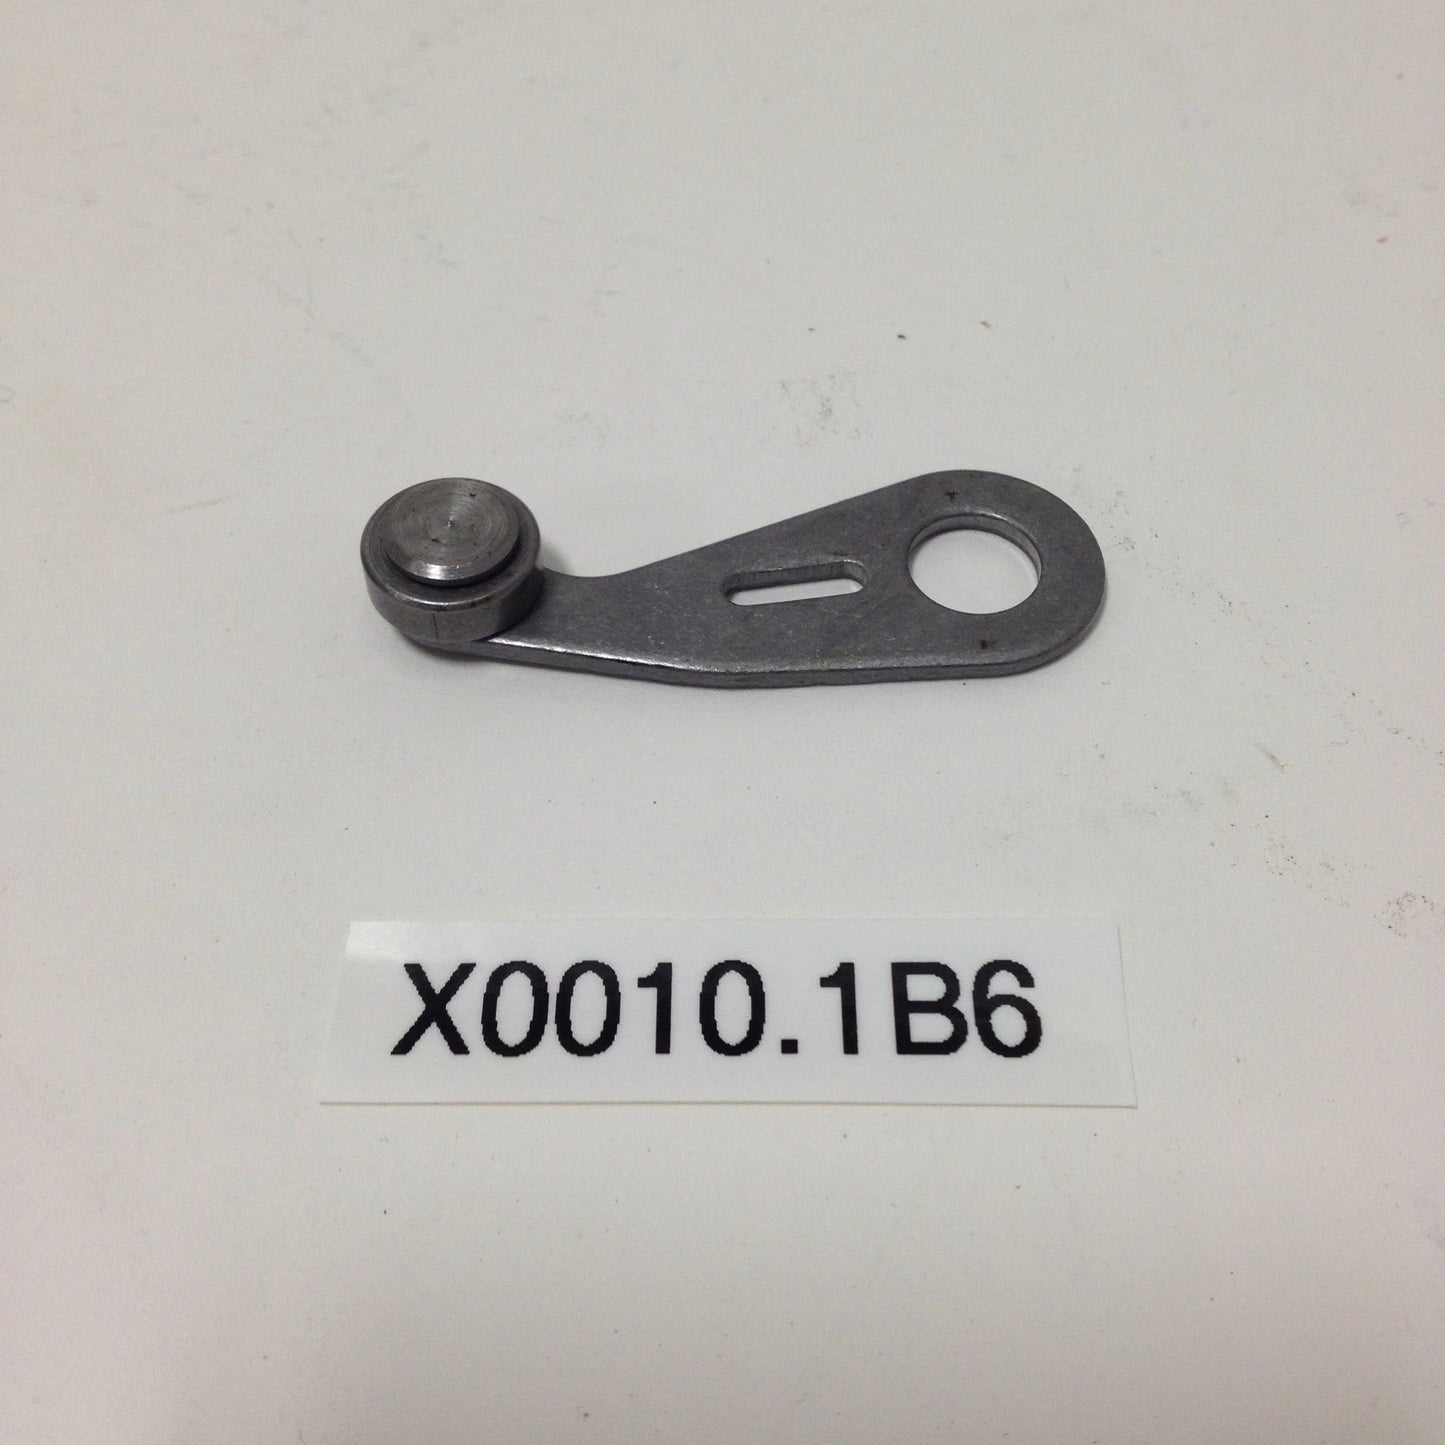 INDEX LEVER ASSEMBLY (X0010.1B6 Rev A)